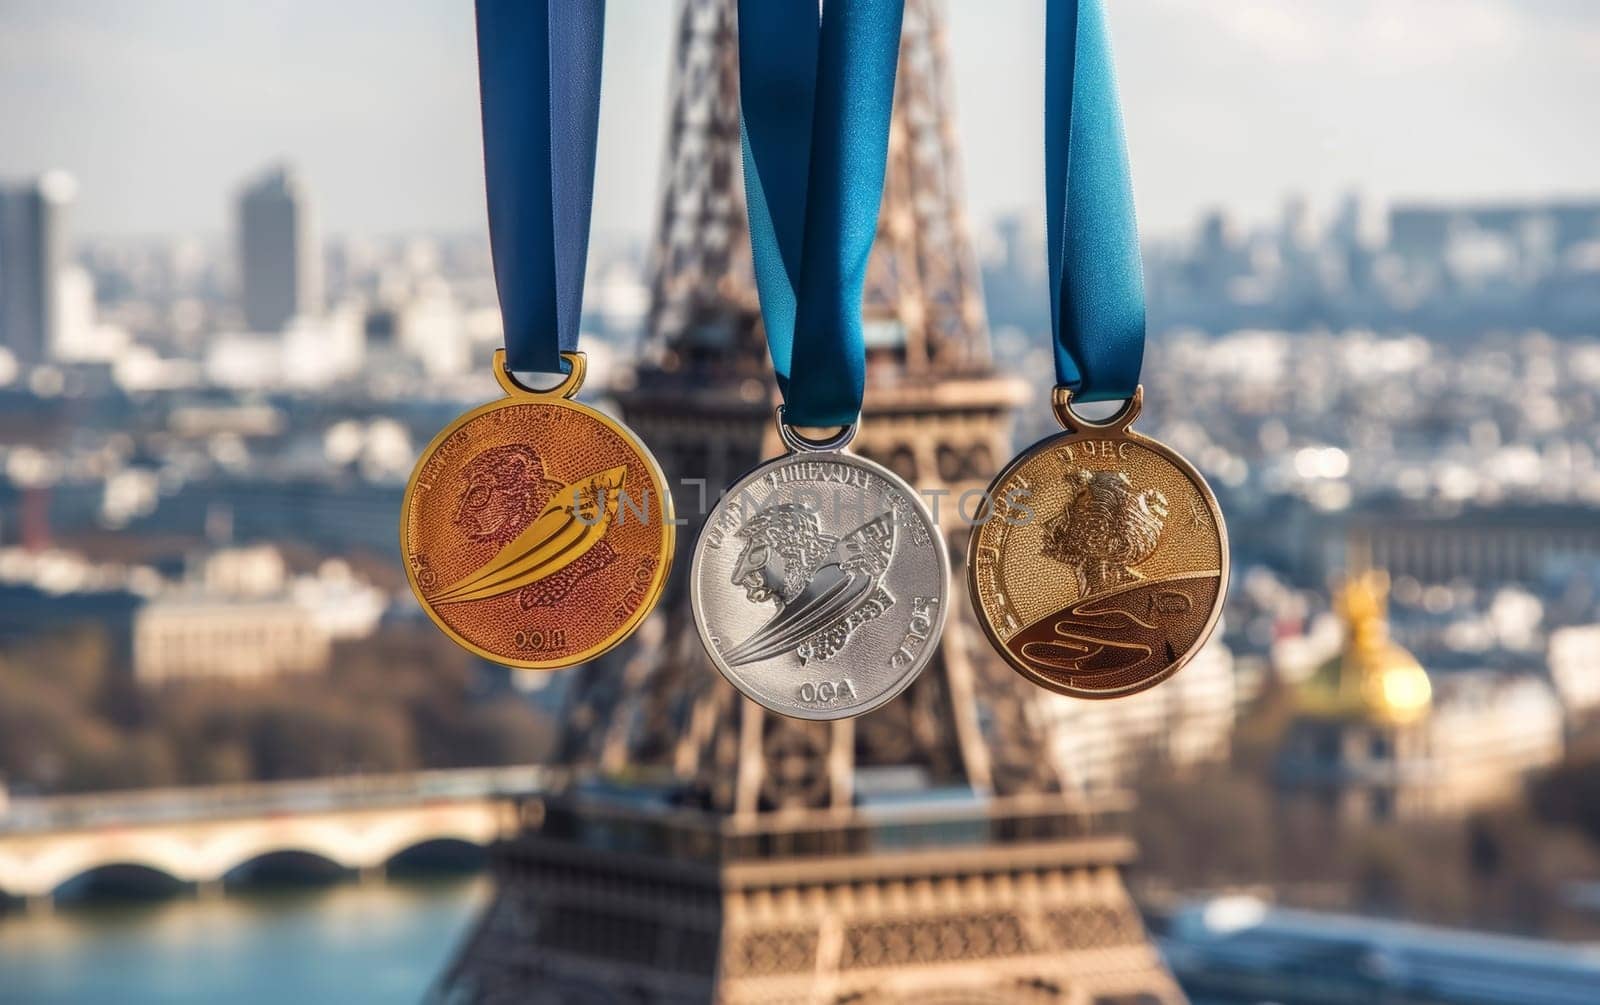 A sharp image of the Paris skyline featuring the Eiffel Tower with a trio of golden medals in the foreground. by sfinks